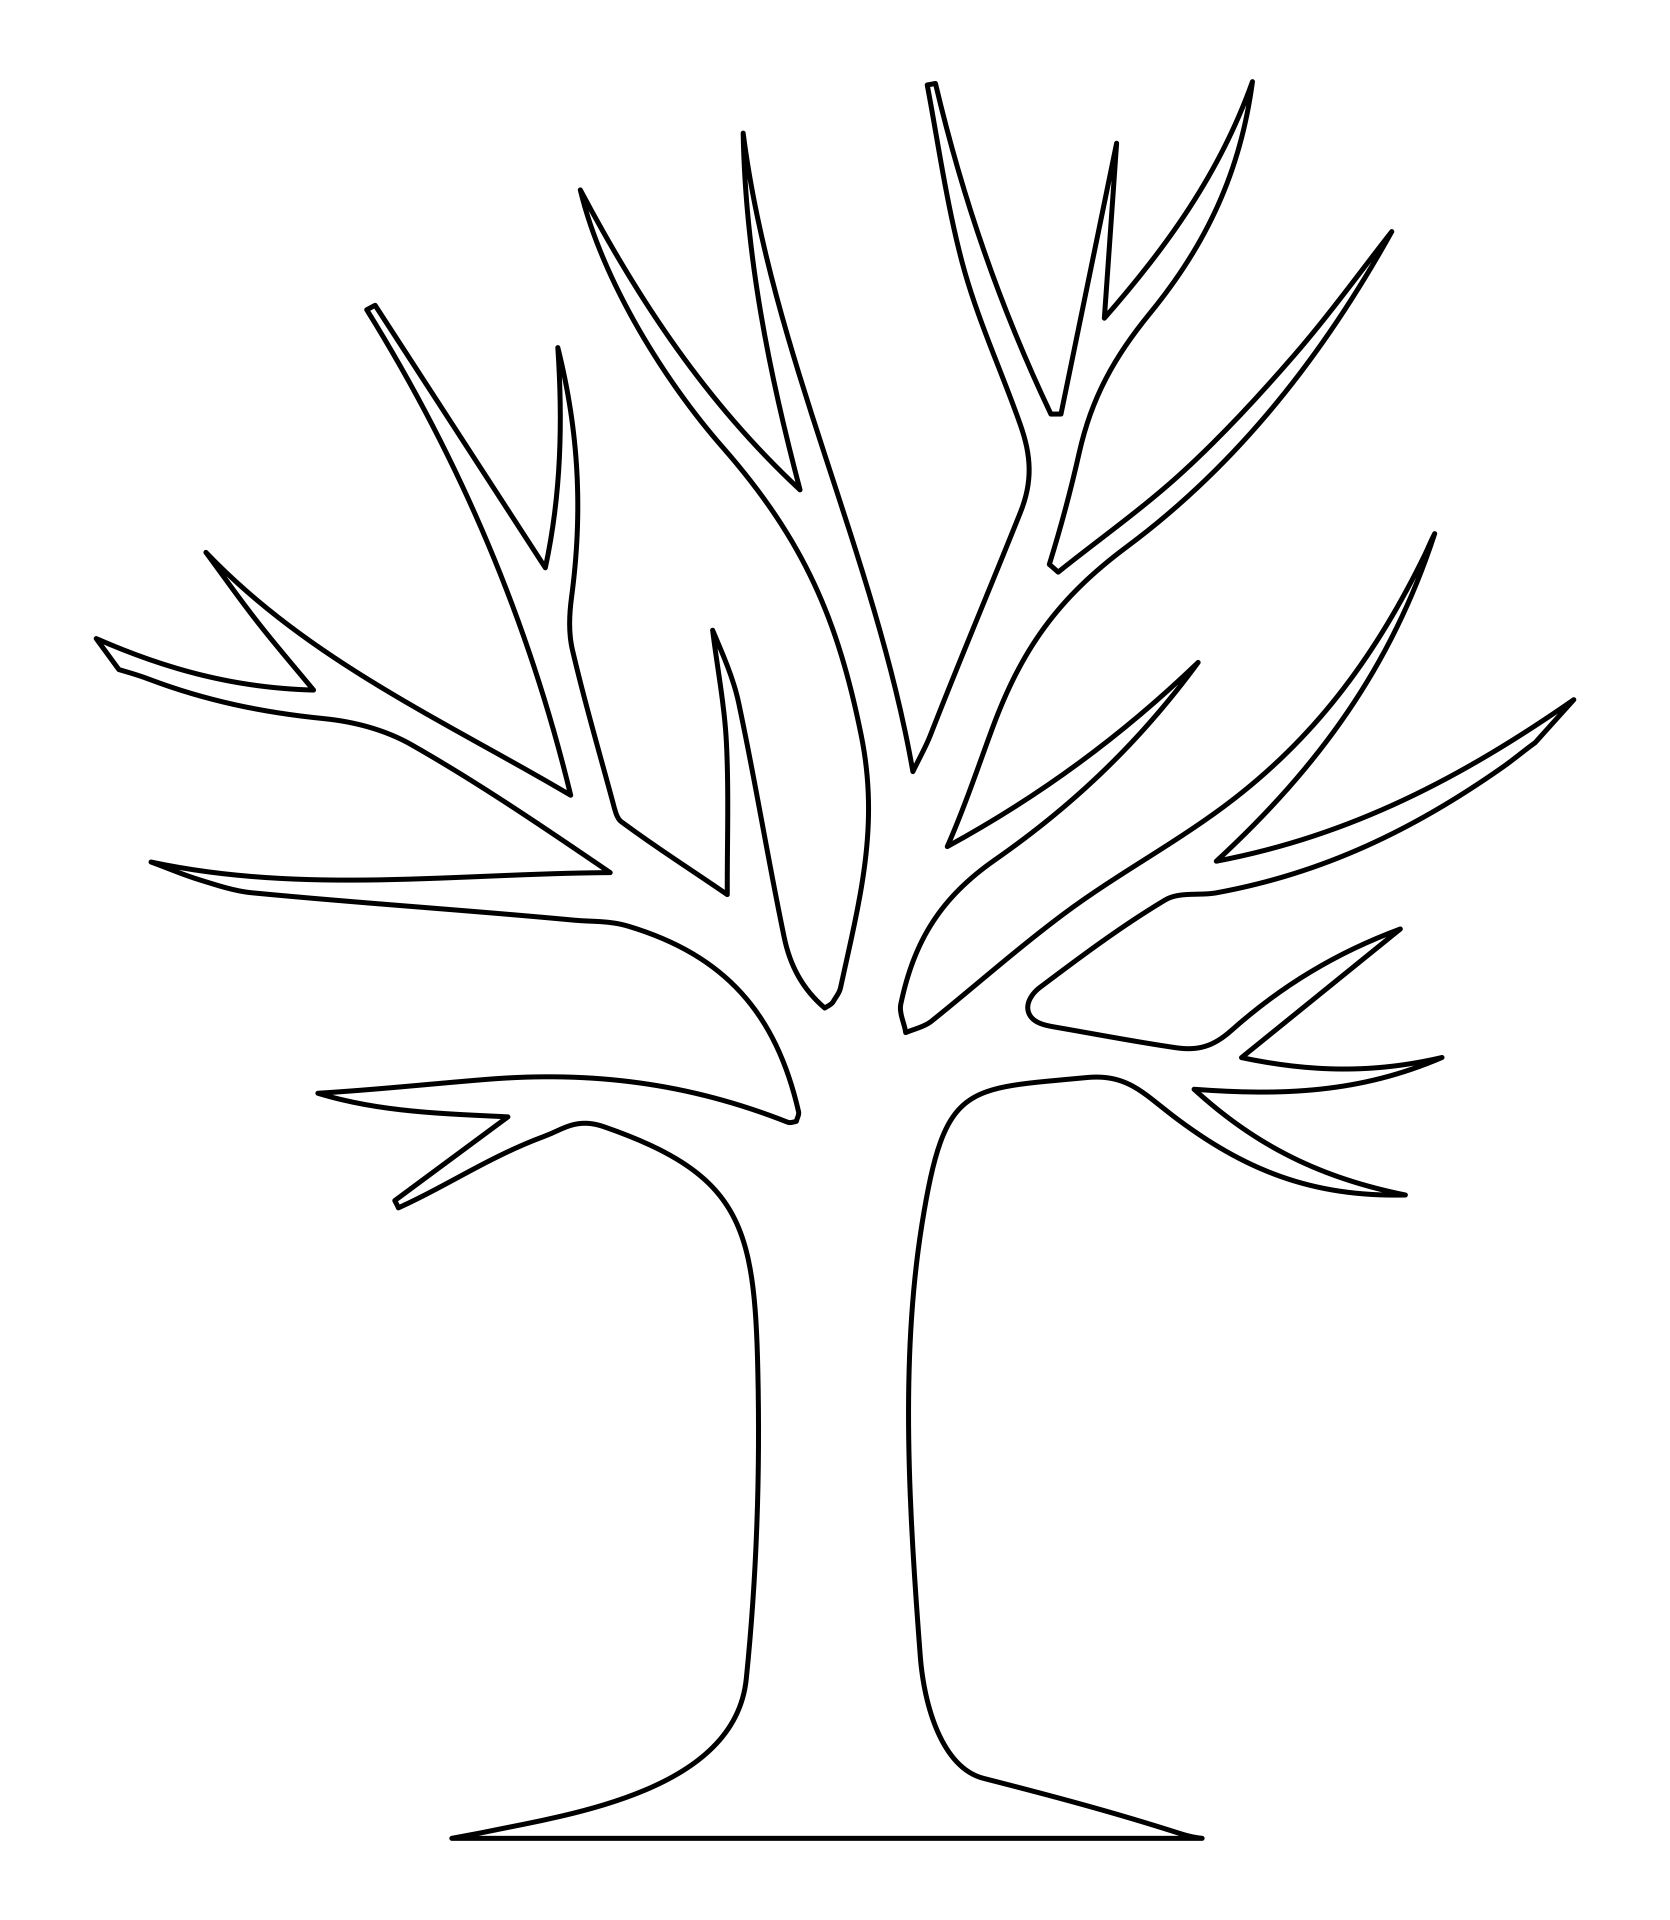 Printable Tree Pattern With Branches